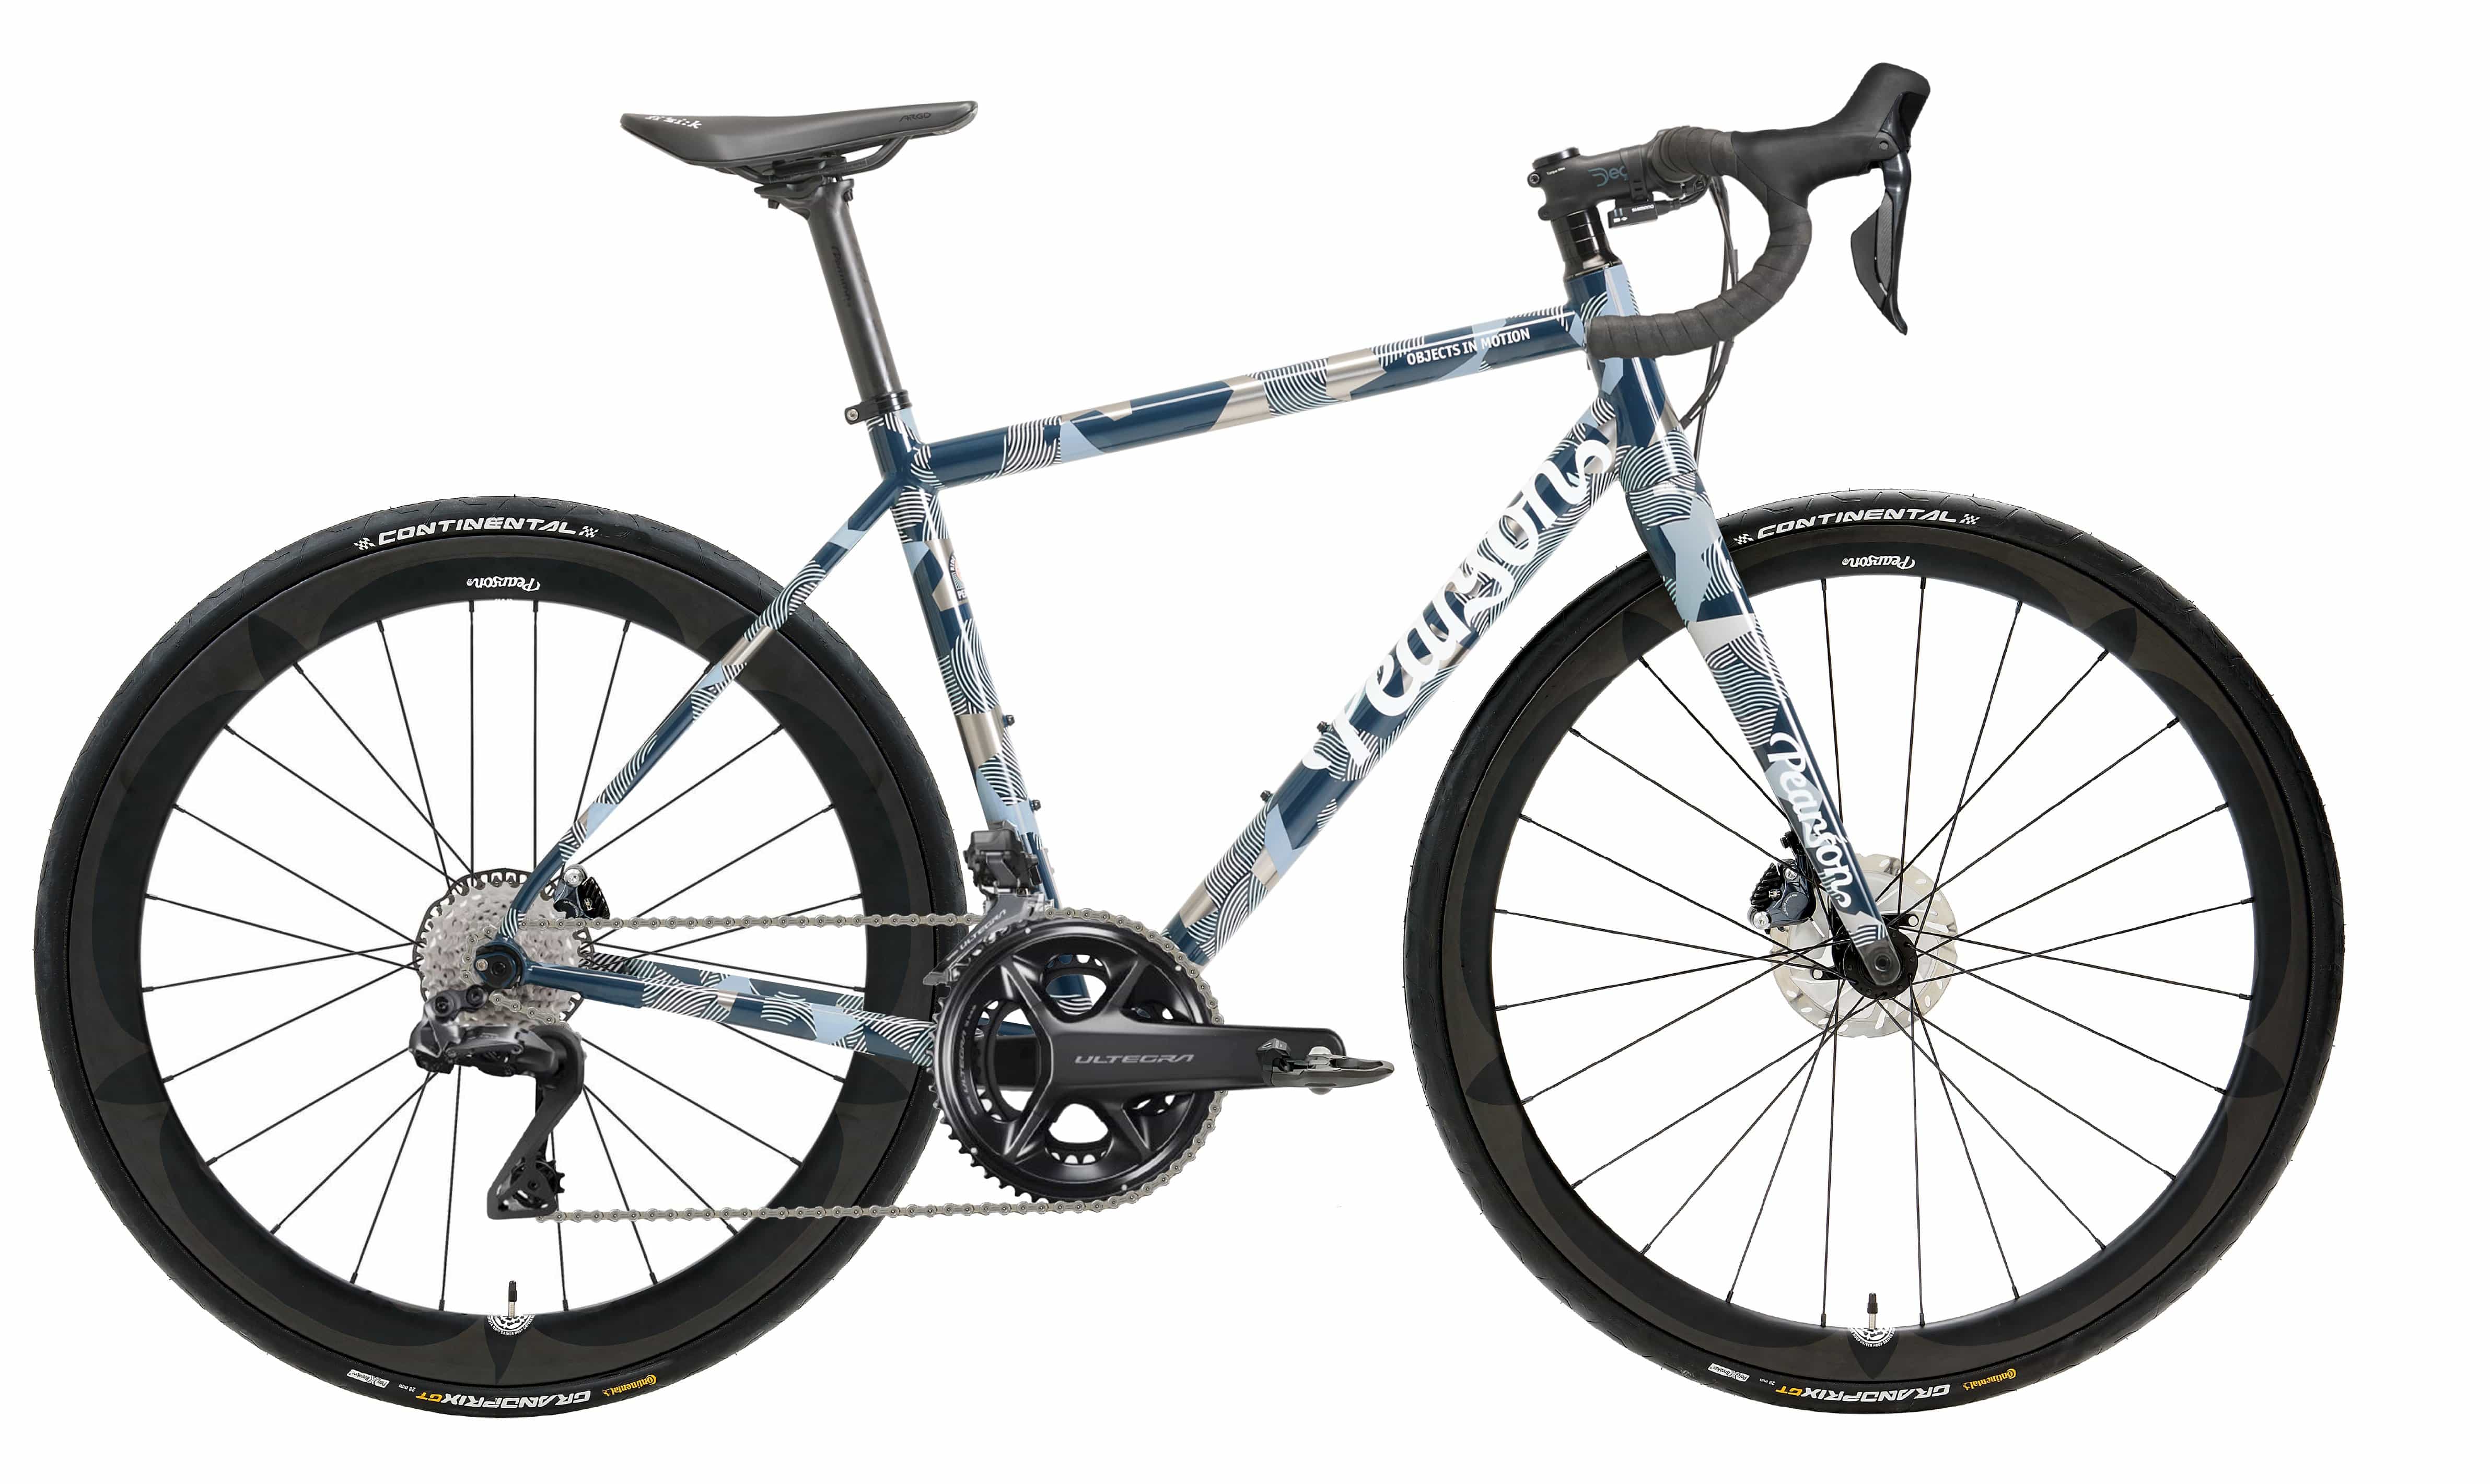 Pcs  Objects In Motion - Titanium Road Bike  X-large / Blue Camo / Shimano Ultegra R8170 12 Speed Di2 - Hoopdriver Cut And Thrust Carbon Wheels